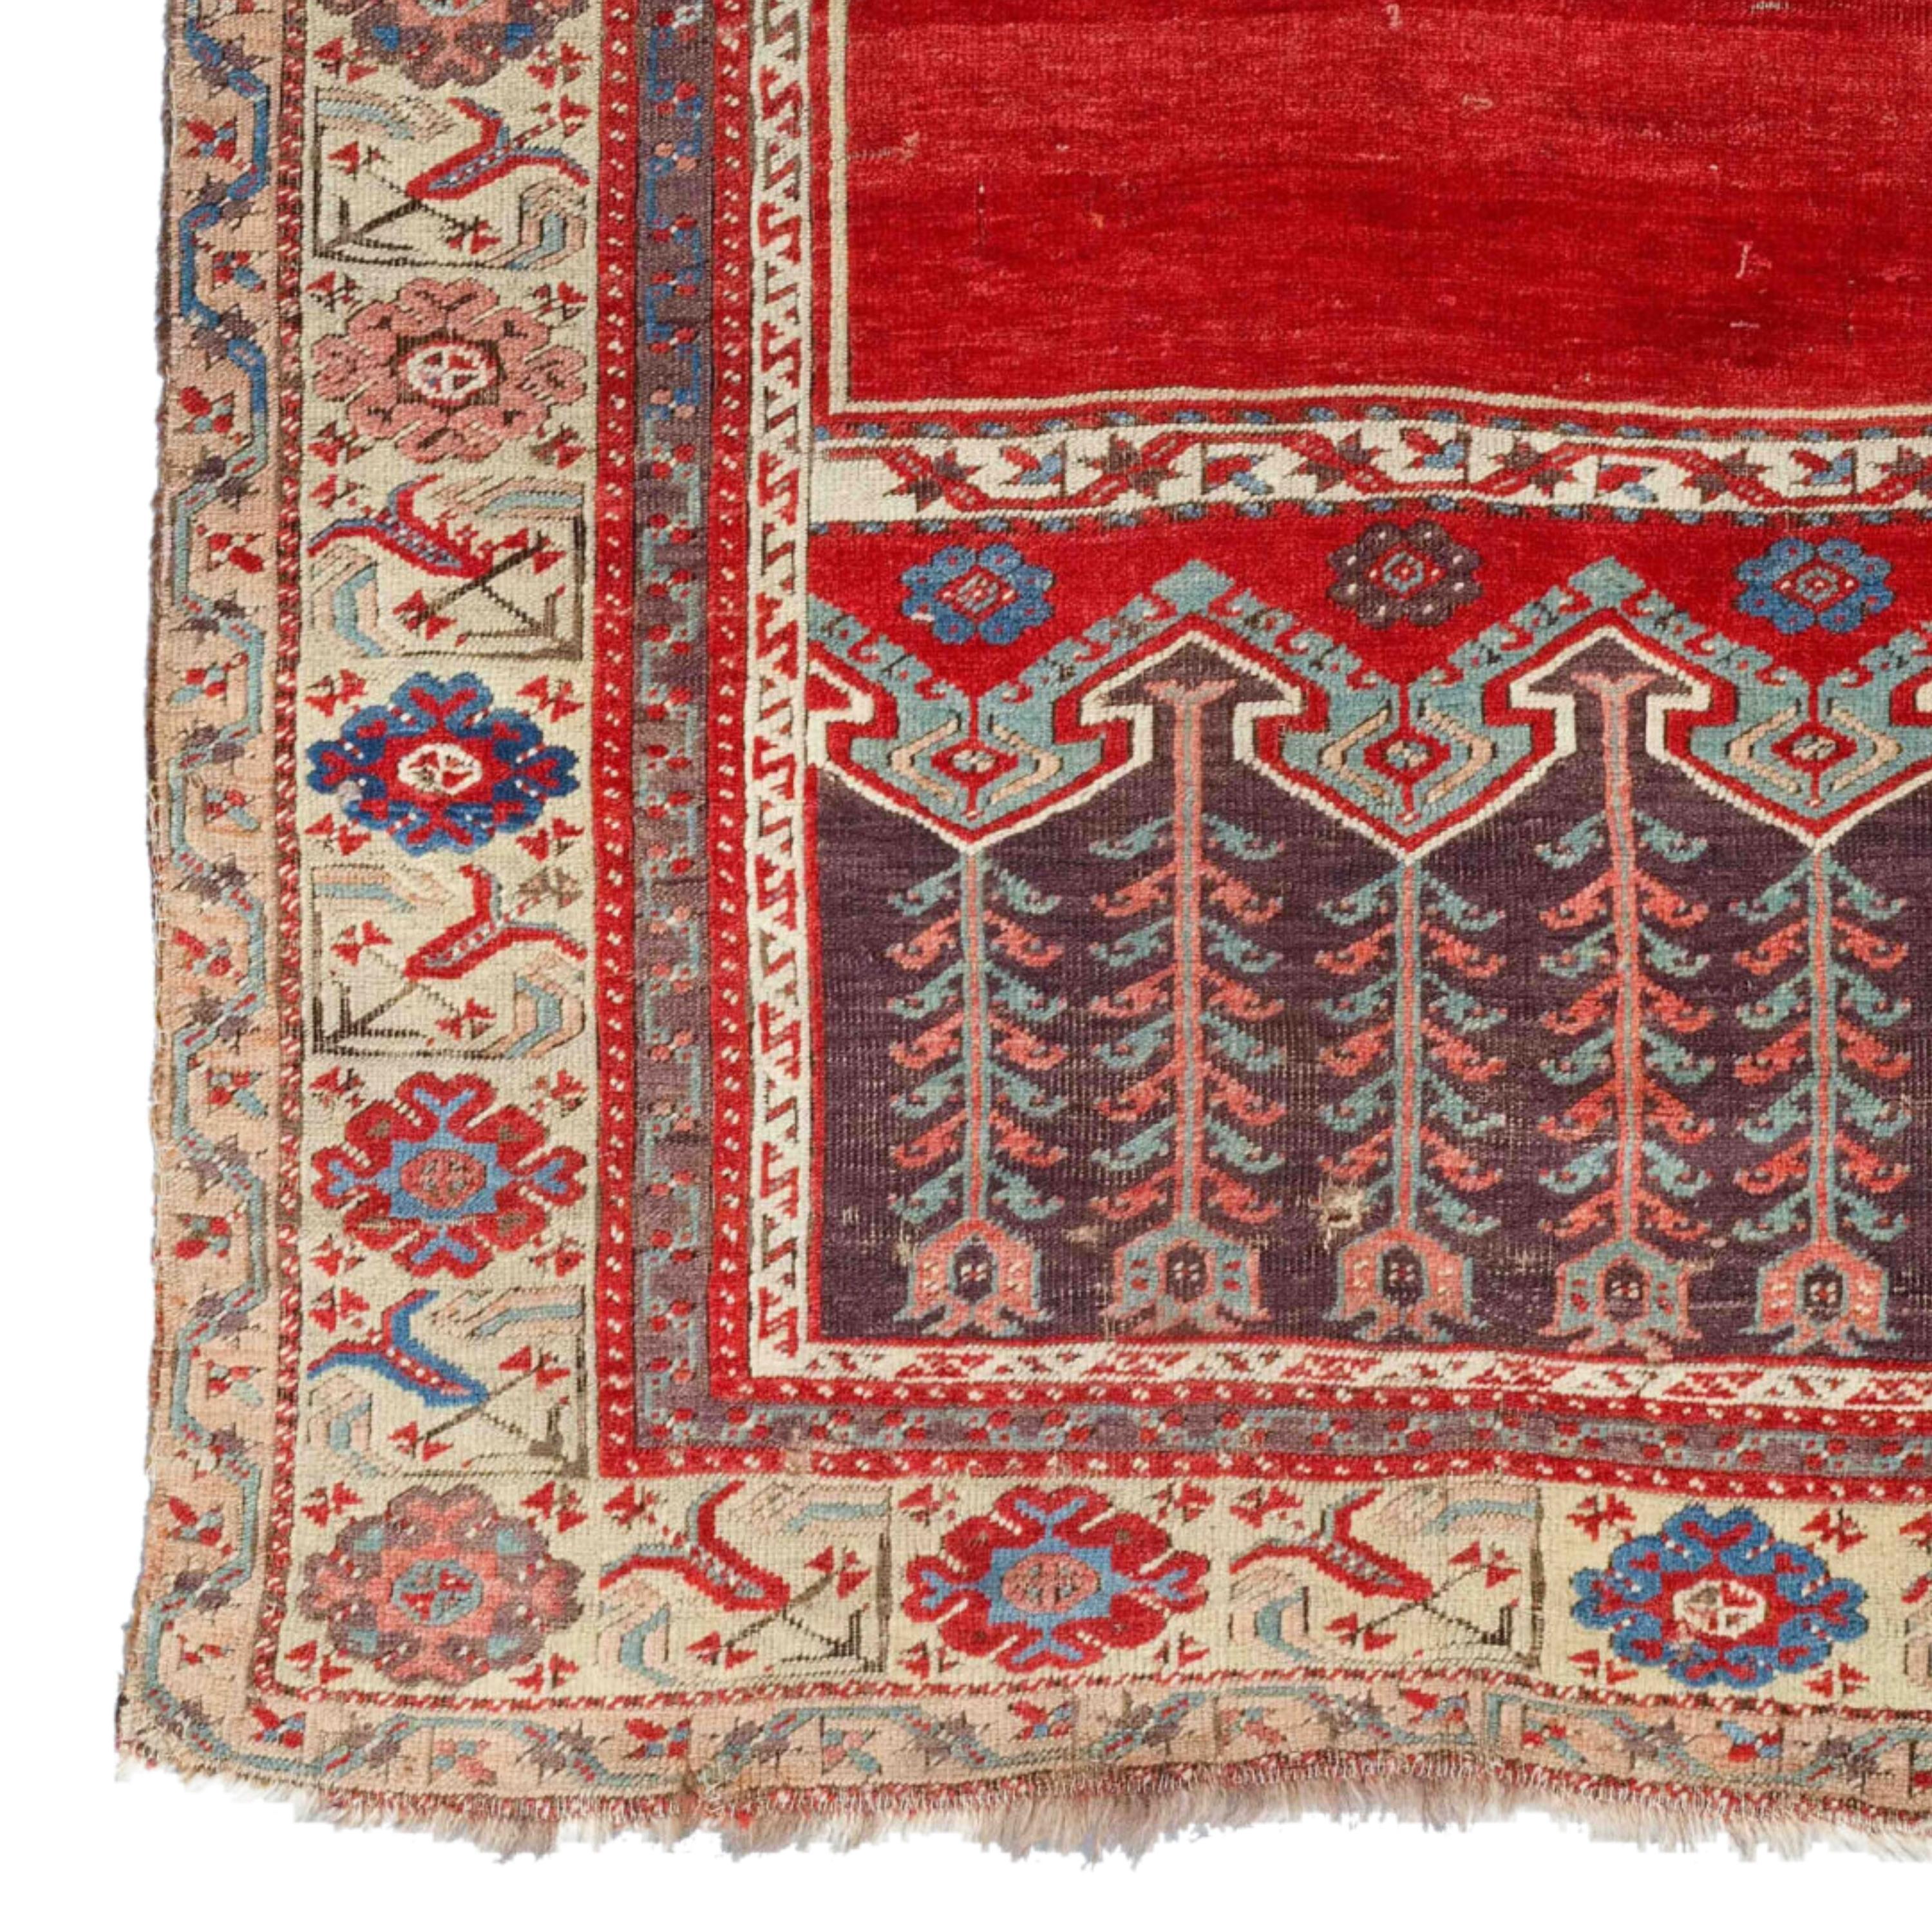 Late 18th Century Central Anatolian Konya Ladik Rug Size 107 x 178 cm (3,51 x 5,83 ft)

Ladik carpet, handwoven floor covering usually in a prayer design and made in or near Lâdik, a town in the Konya Plain of south-central Turkey. Ladik prayer rugs